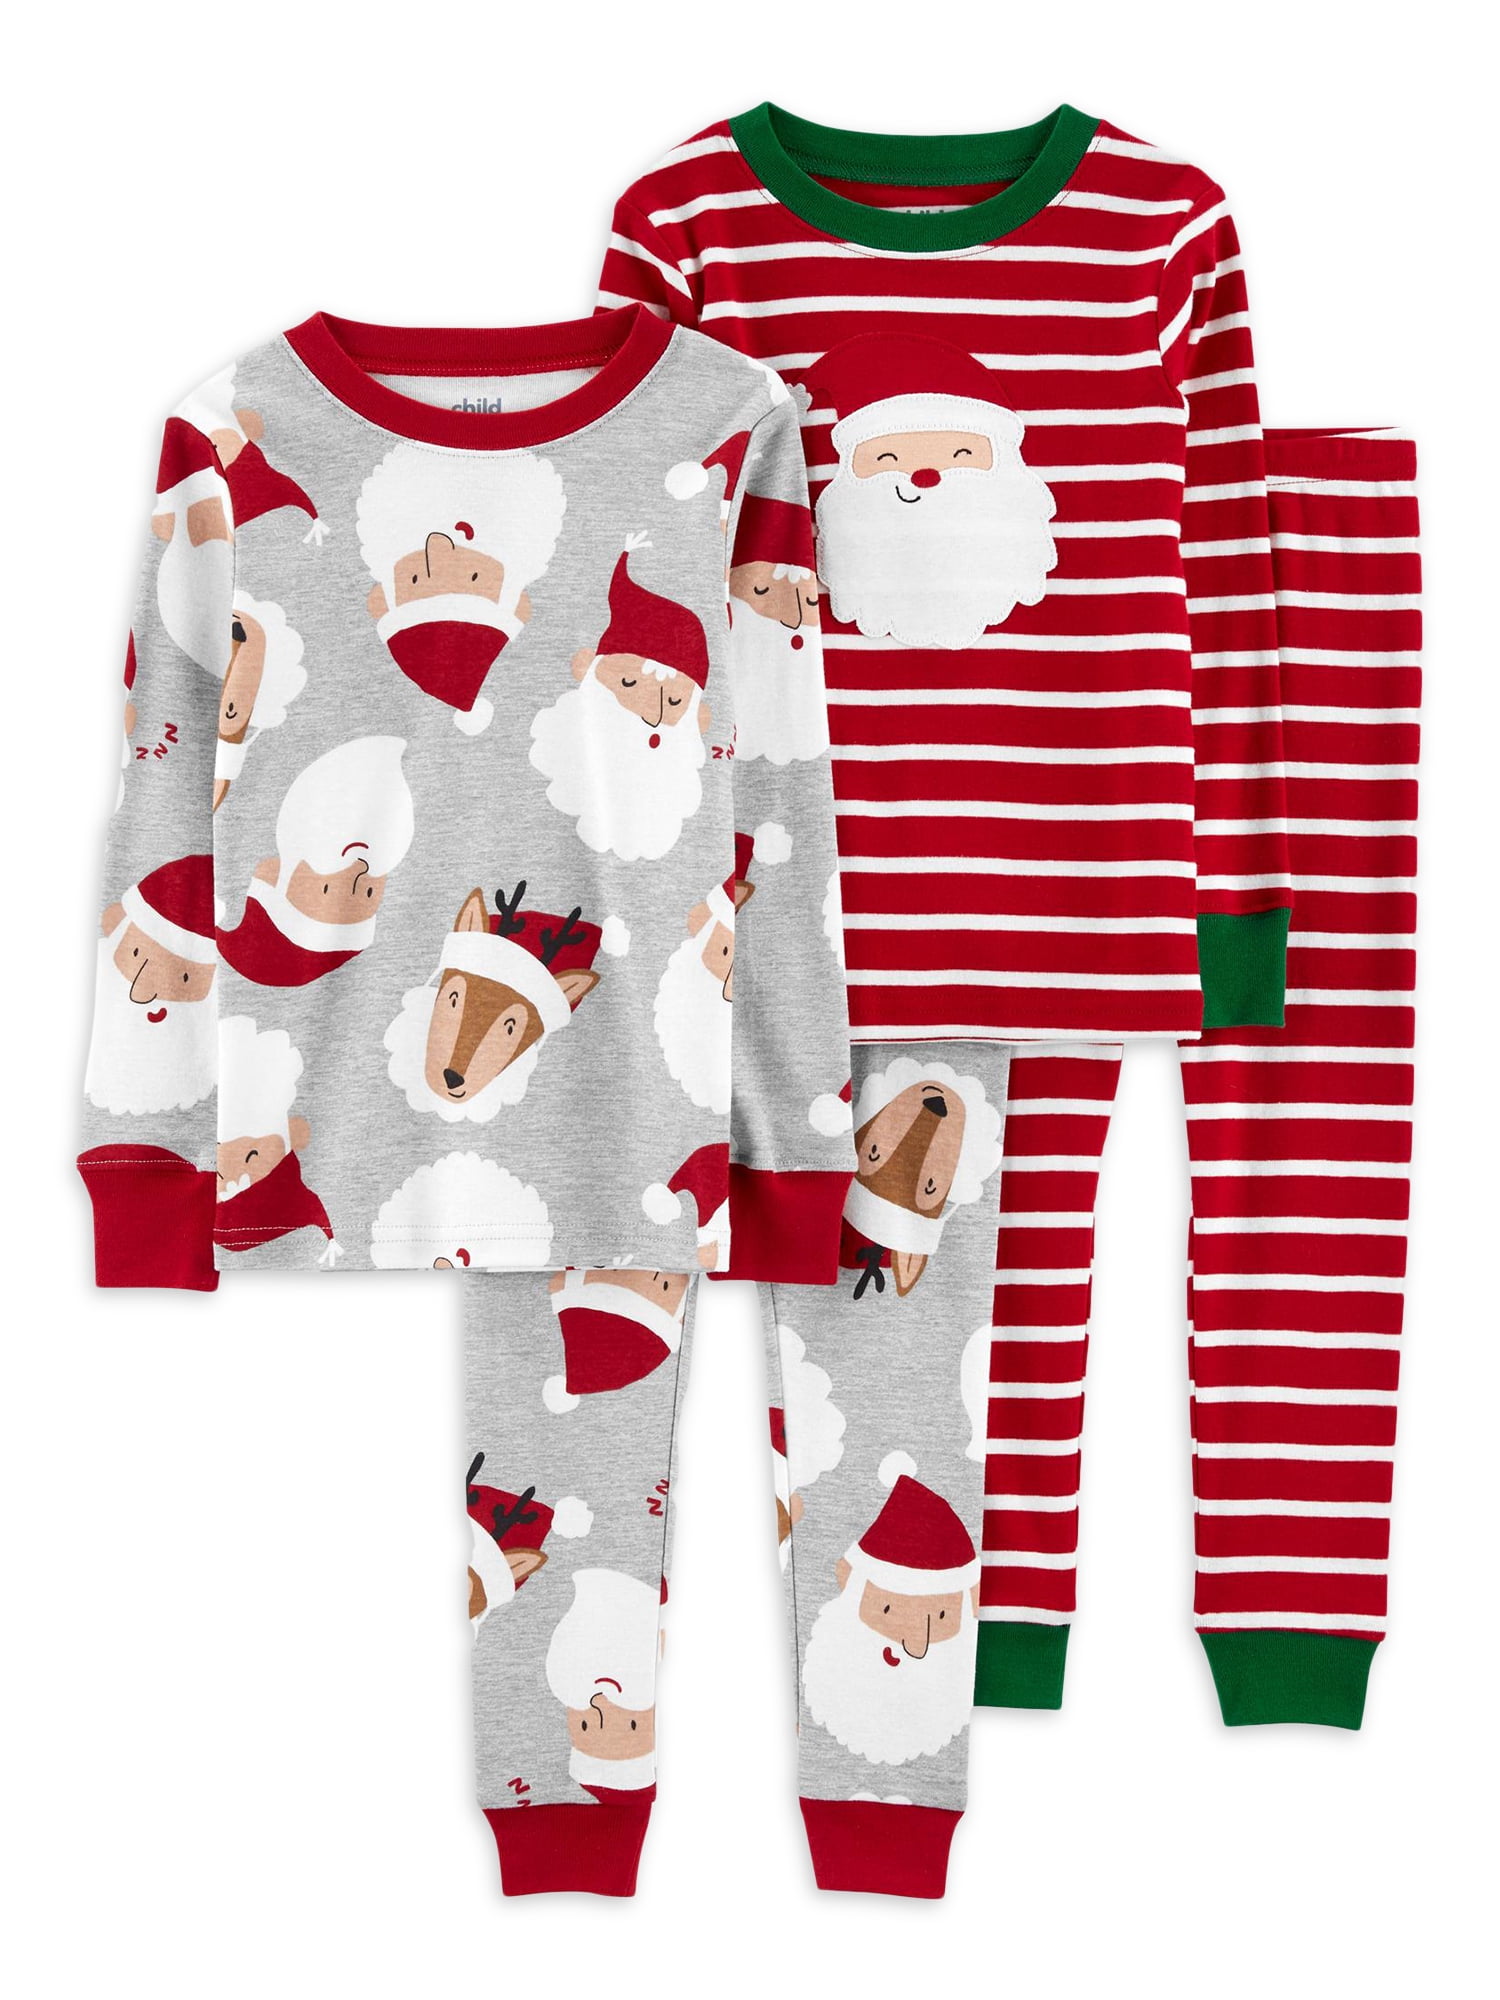 Carter's Child of Mine Bbay and Toddler Boy Pajama Set, 4-Piece, Sizes 12M-5T